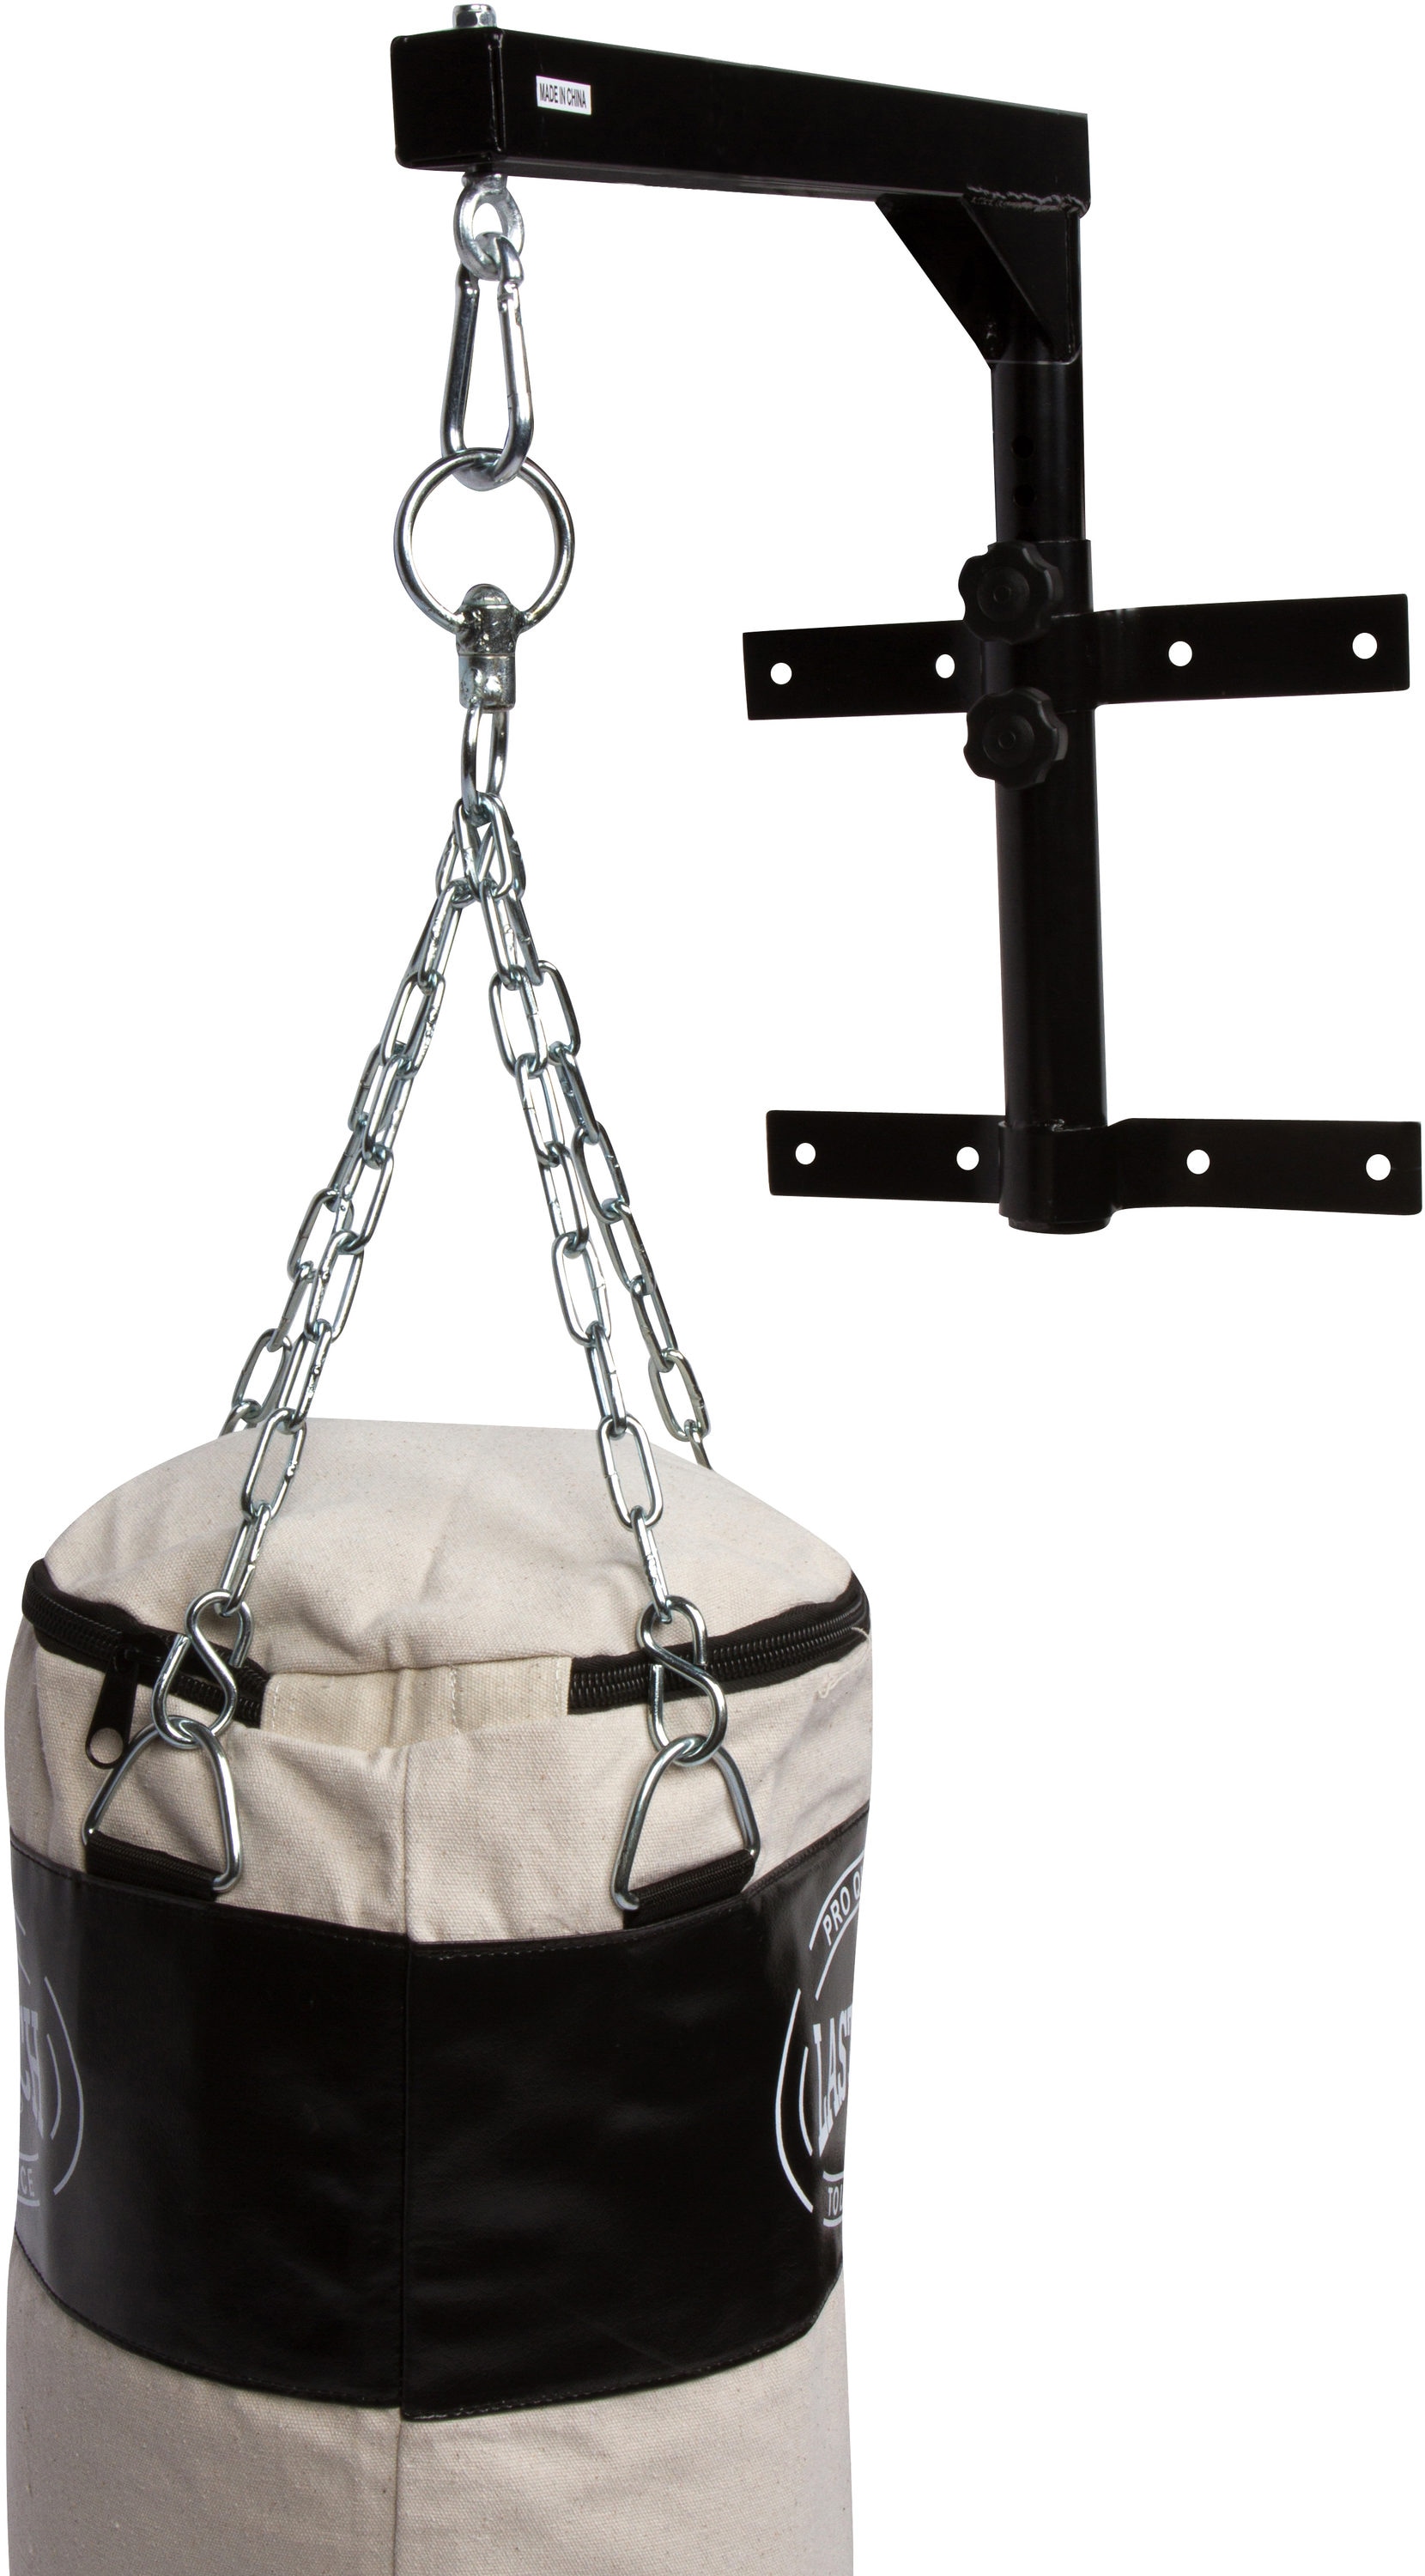 4 Hook 3600 Rotation Swivel Heavy Duty Stainless Steel 48cm Length Punch Bag Chain by Athletics Gear Boxing Bag Hanger Chain Hold up to 150Kg Weight 